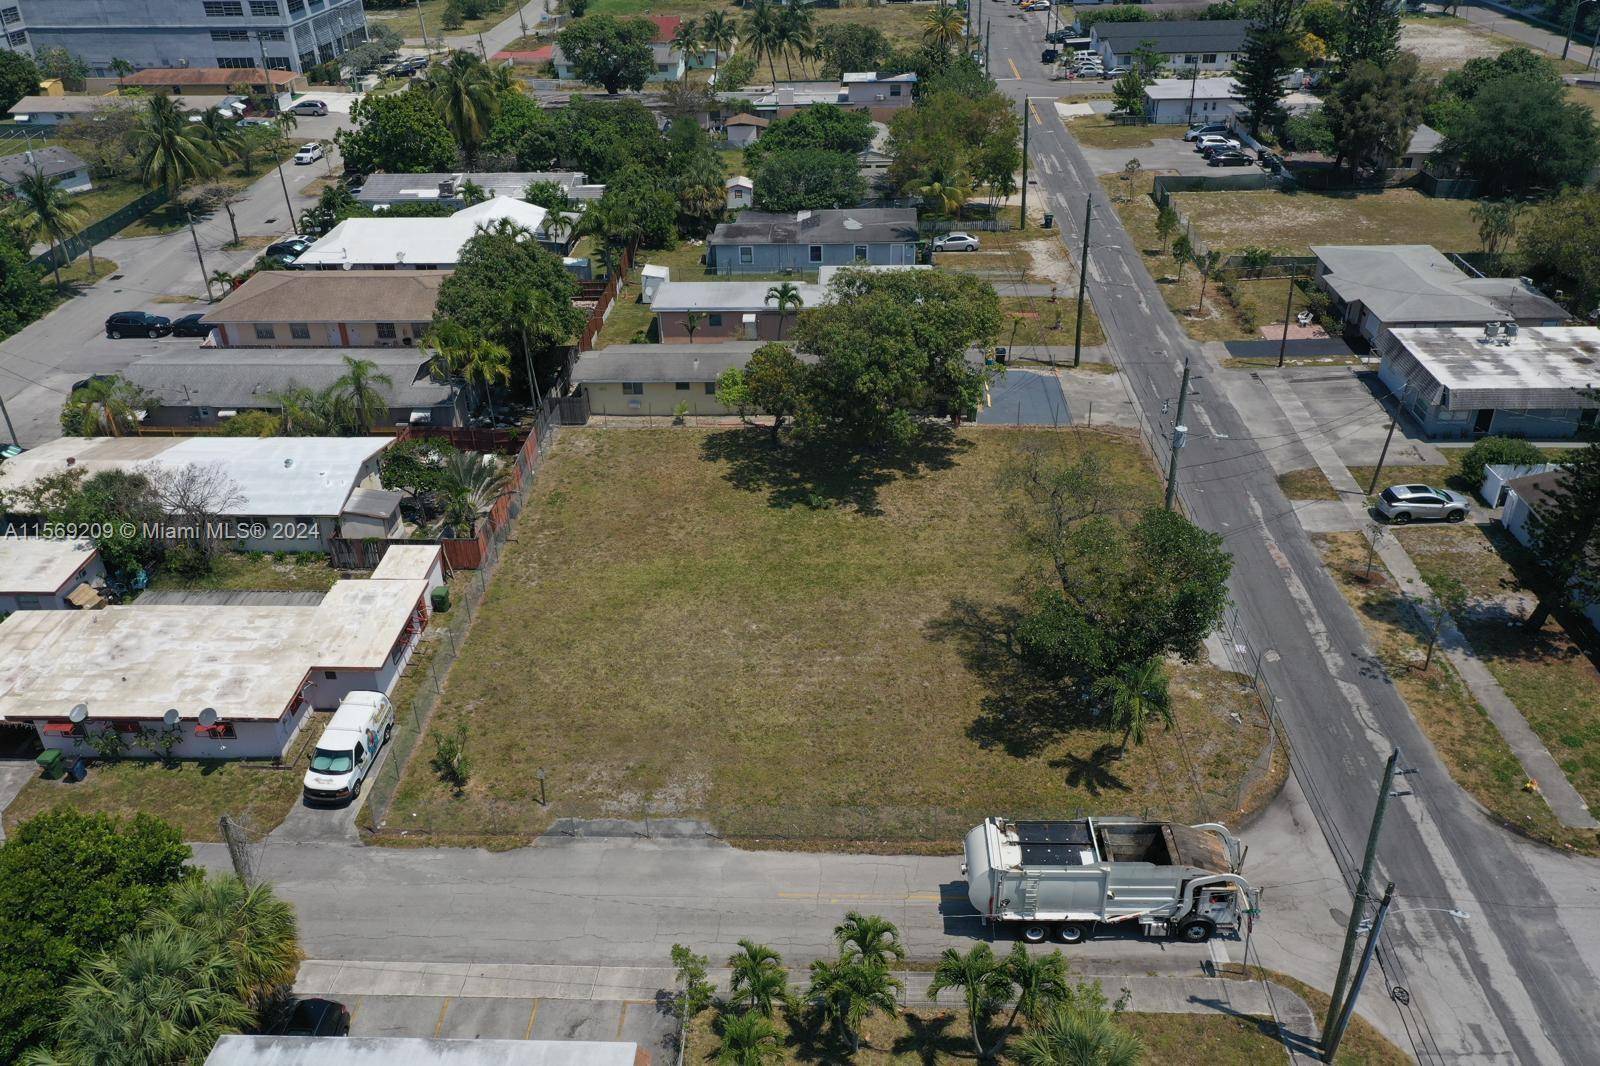 Rare opportunity to secure a vacant lot in the most desirable Aventura Hallandale neighborhood located between US1 and Old Federal Hwy across the street from Gulfstream Park.